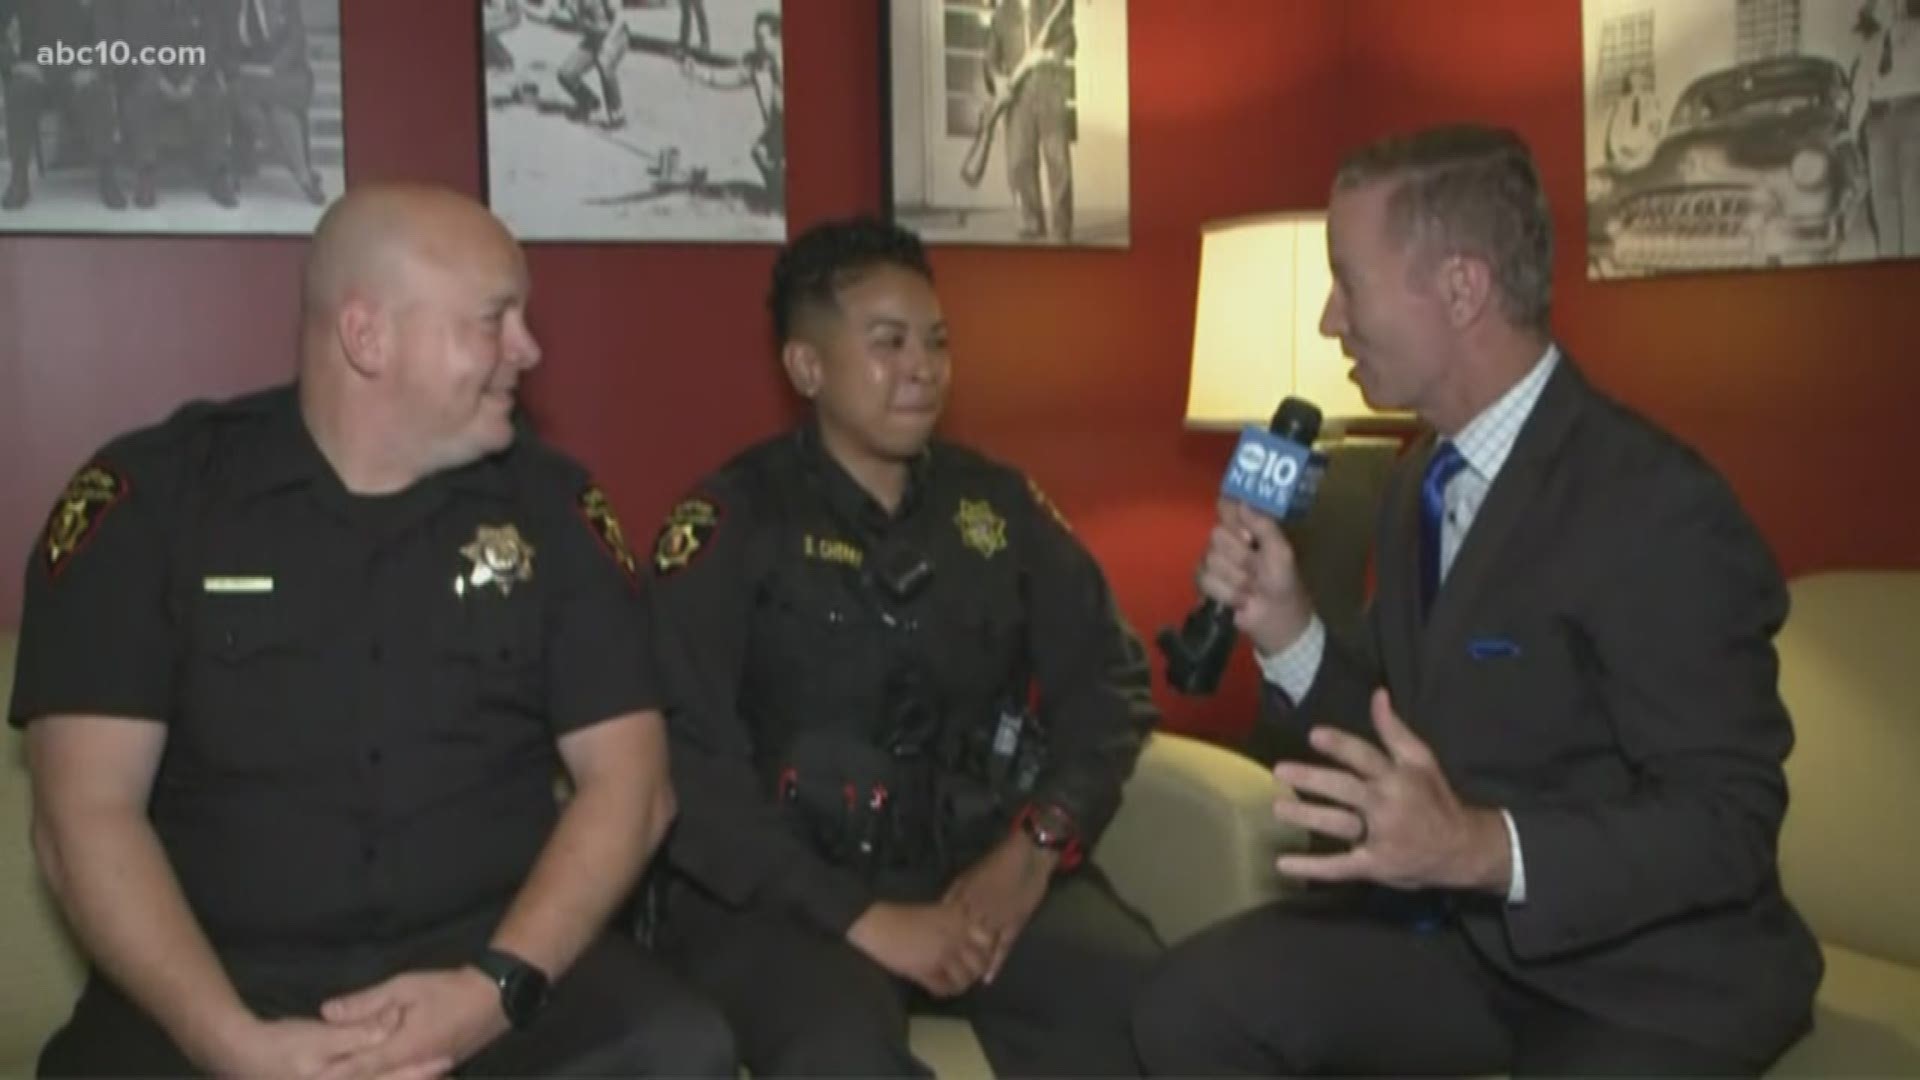 Deputy Cherry and Pratt talk with Mark S. Allen about humanizing the people behind the badge.